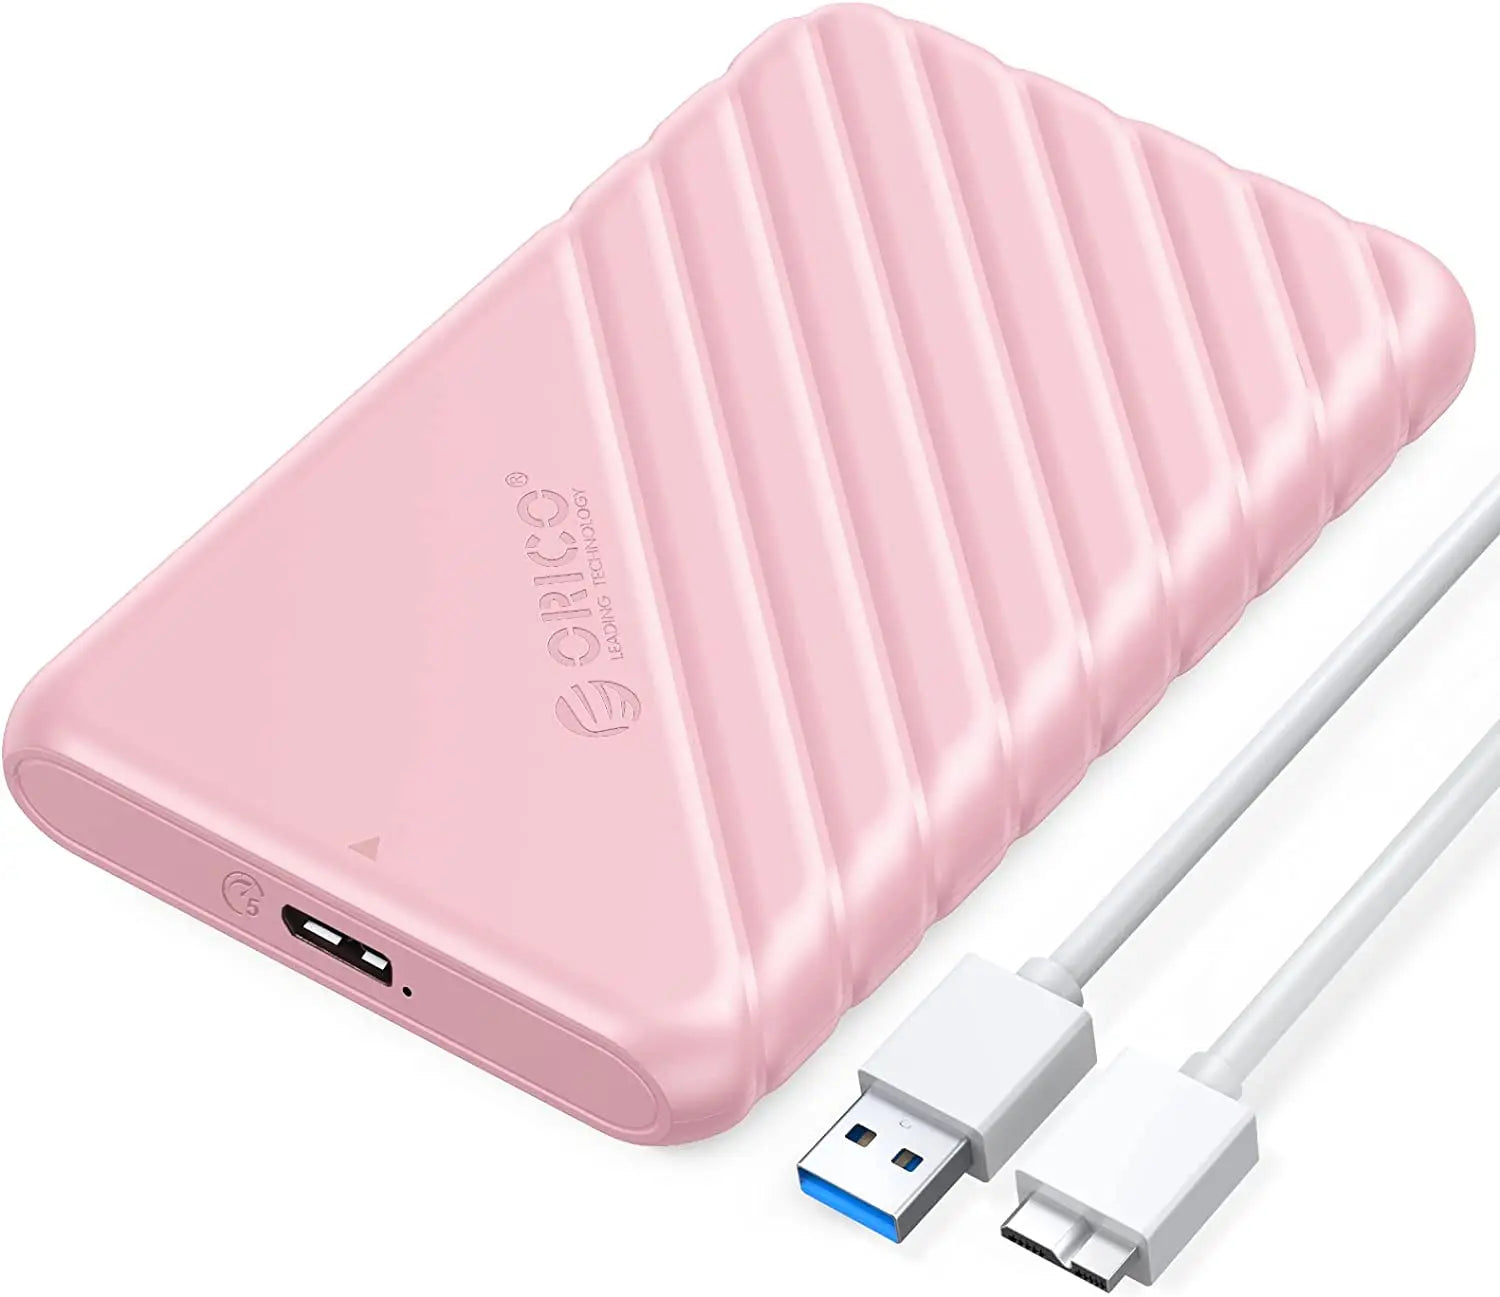 Multi-Colored High Speed 2.5-inch SATA to USB 3.0 HDD Enclosure Orico